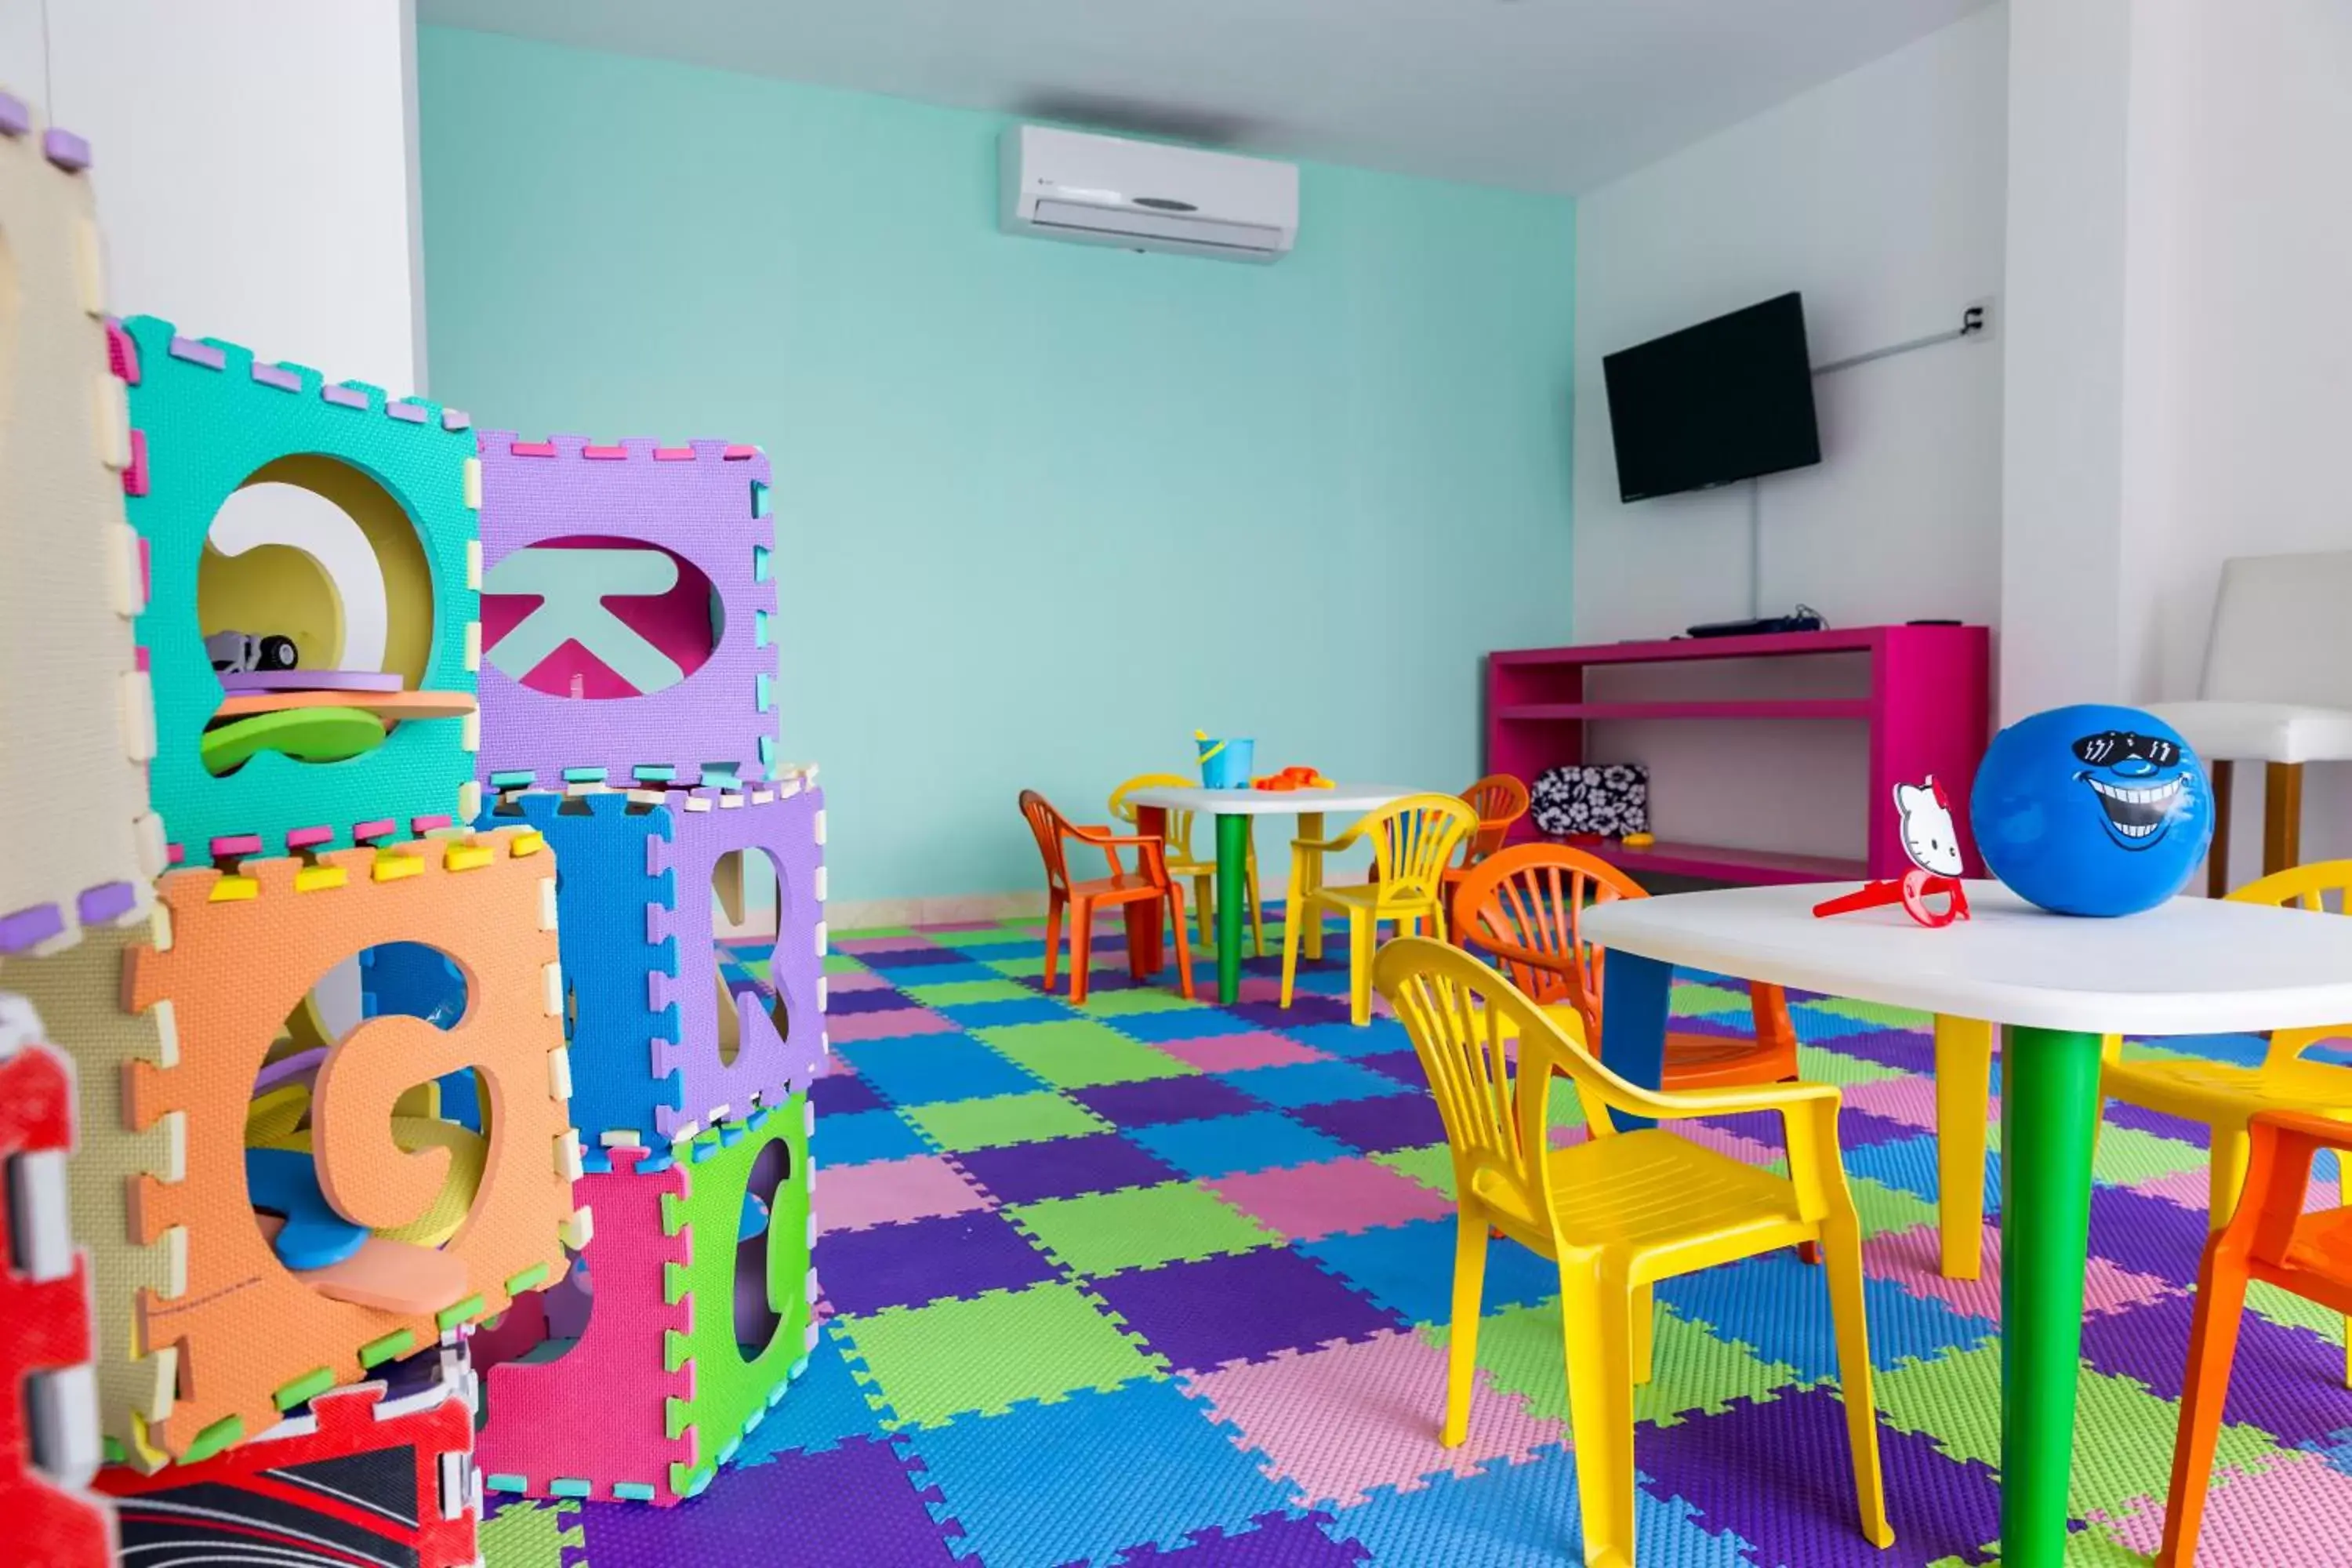 Kids's club, Kid's Club in Anah Suites by Sunest